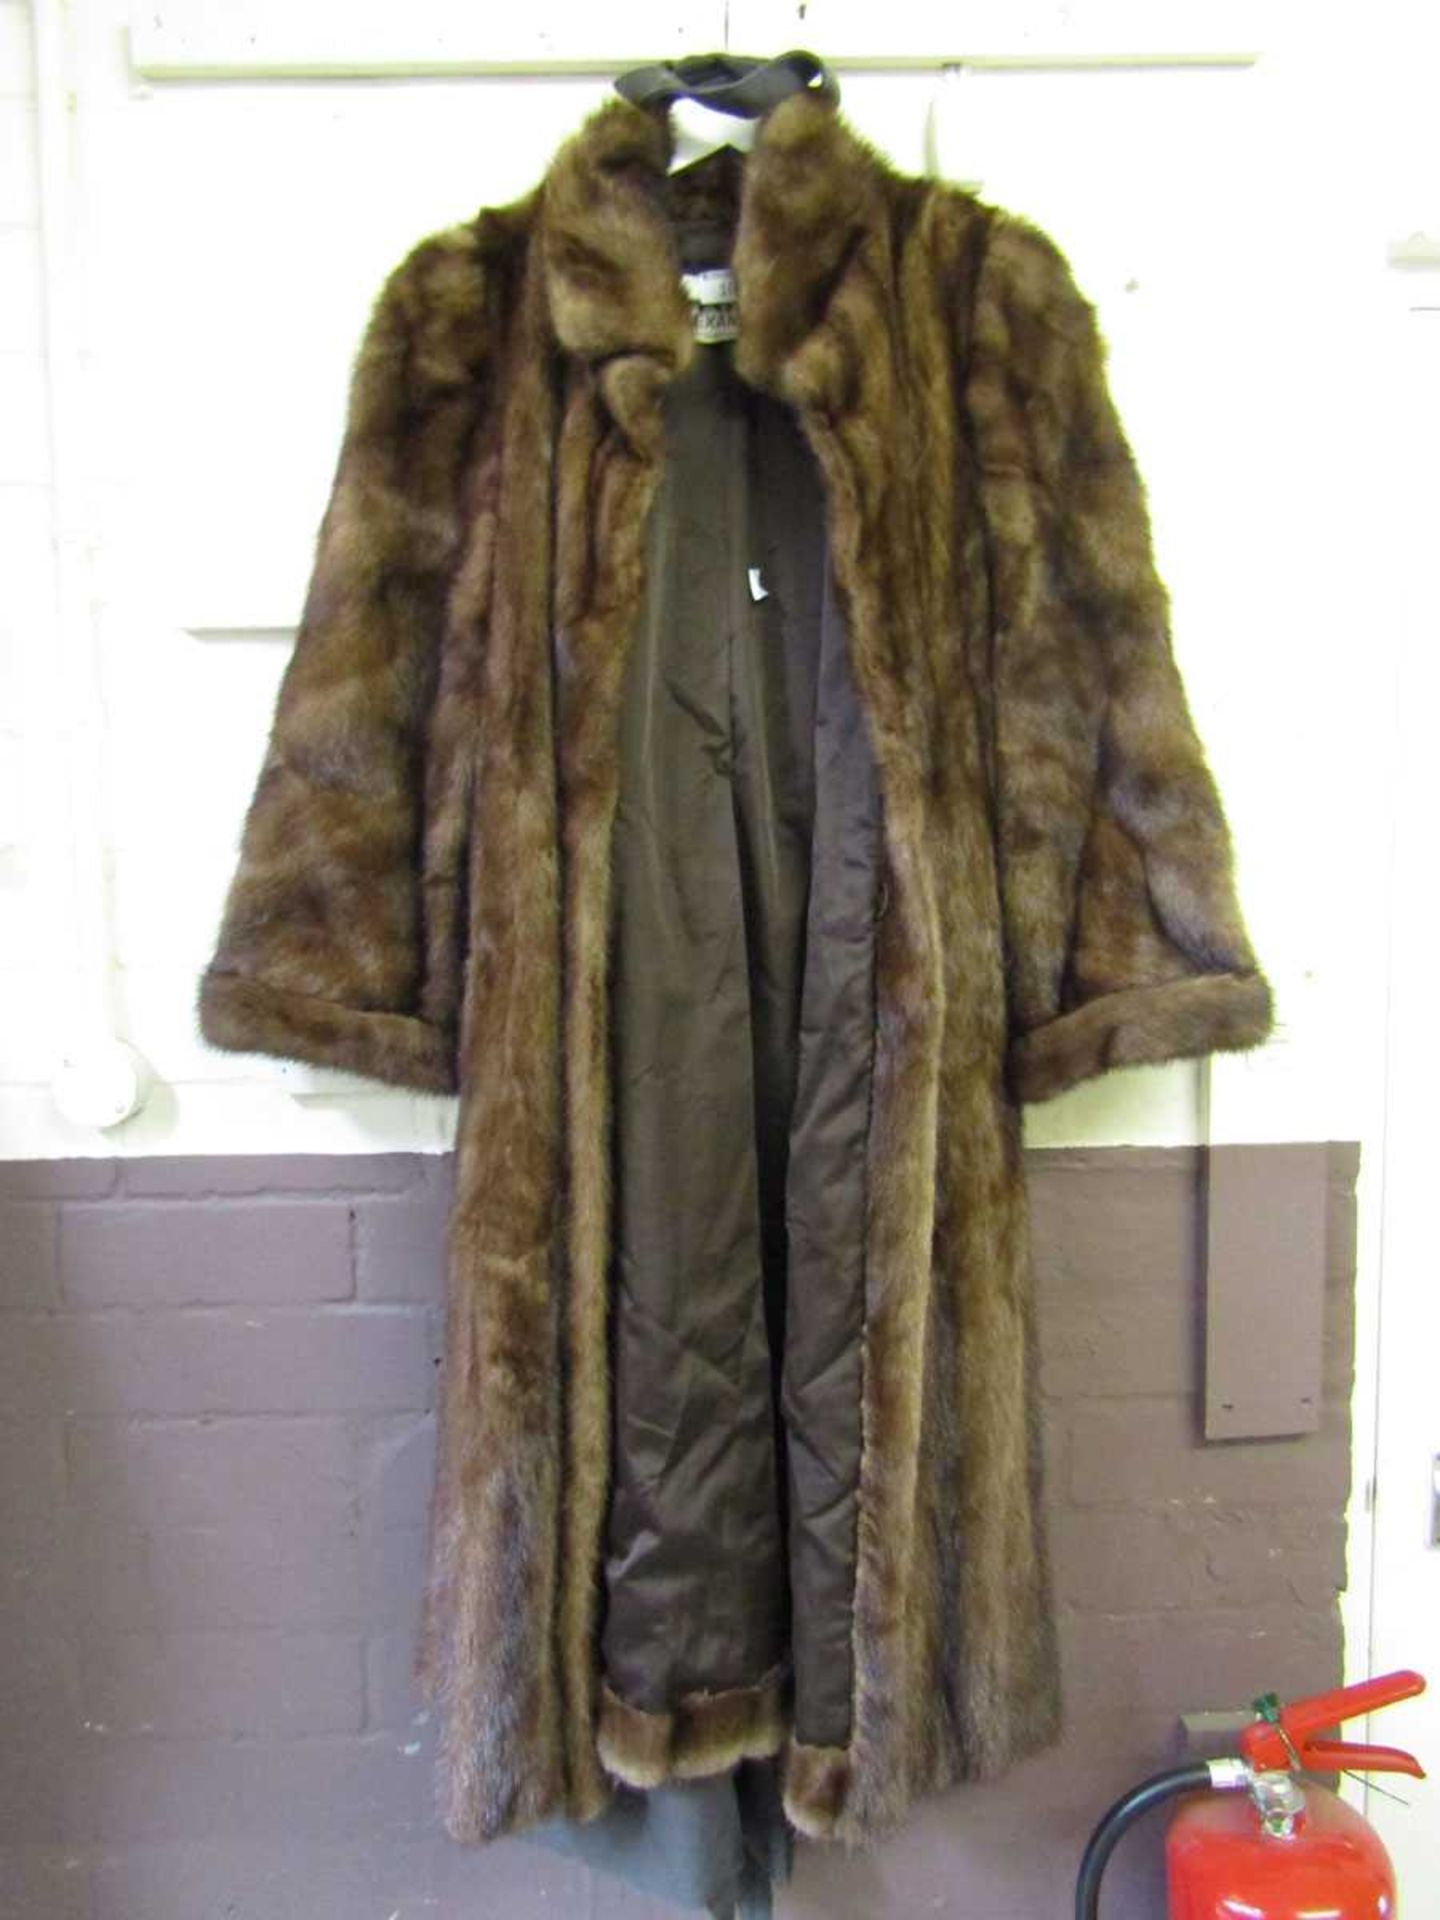 A brown fur coat by Claude Alexandre of Paris along with a Christian Dior furrier's bag